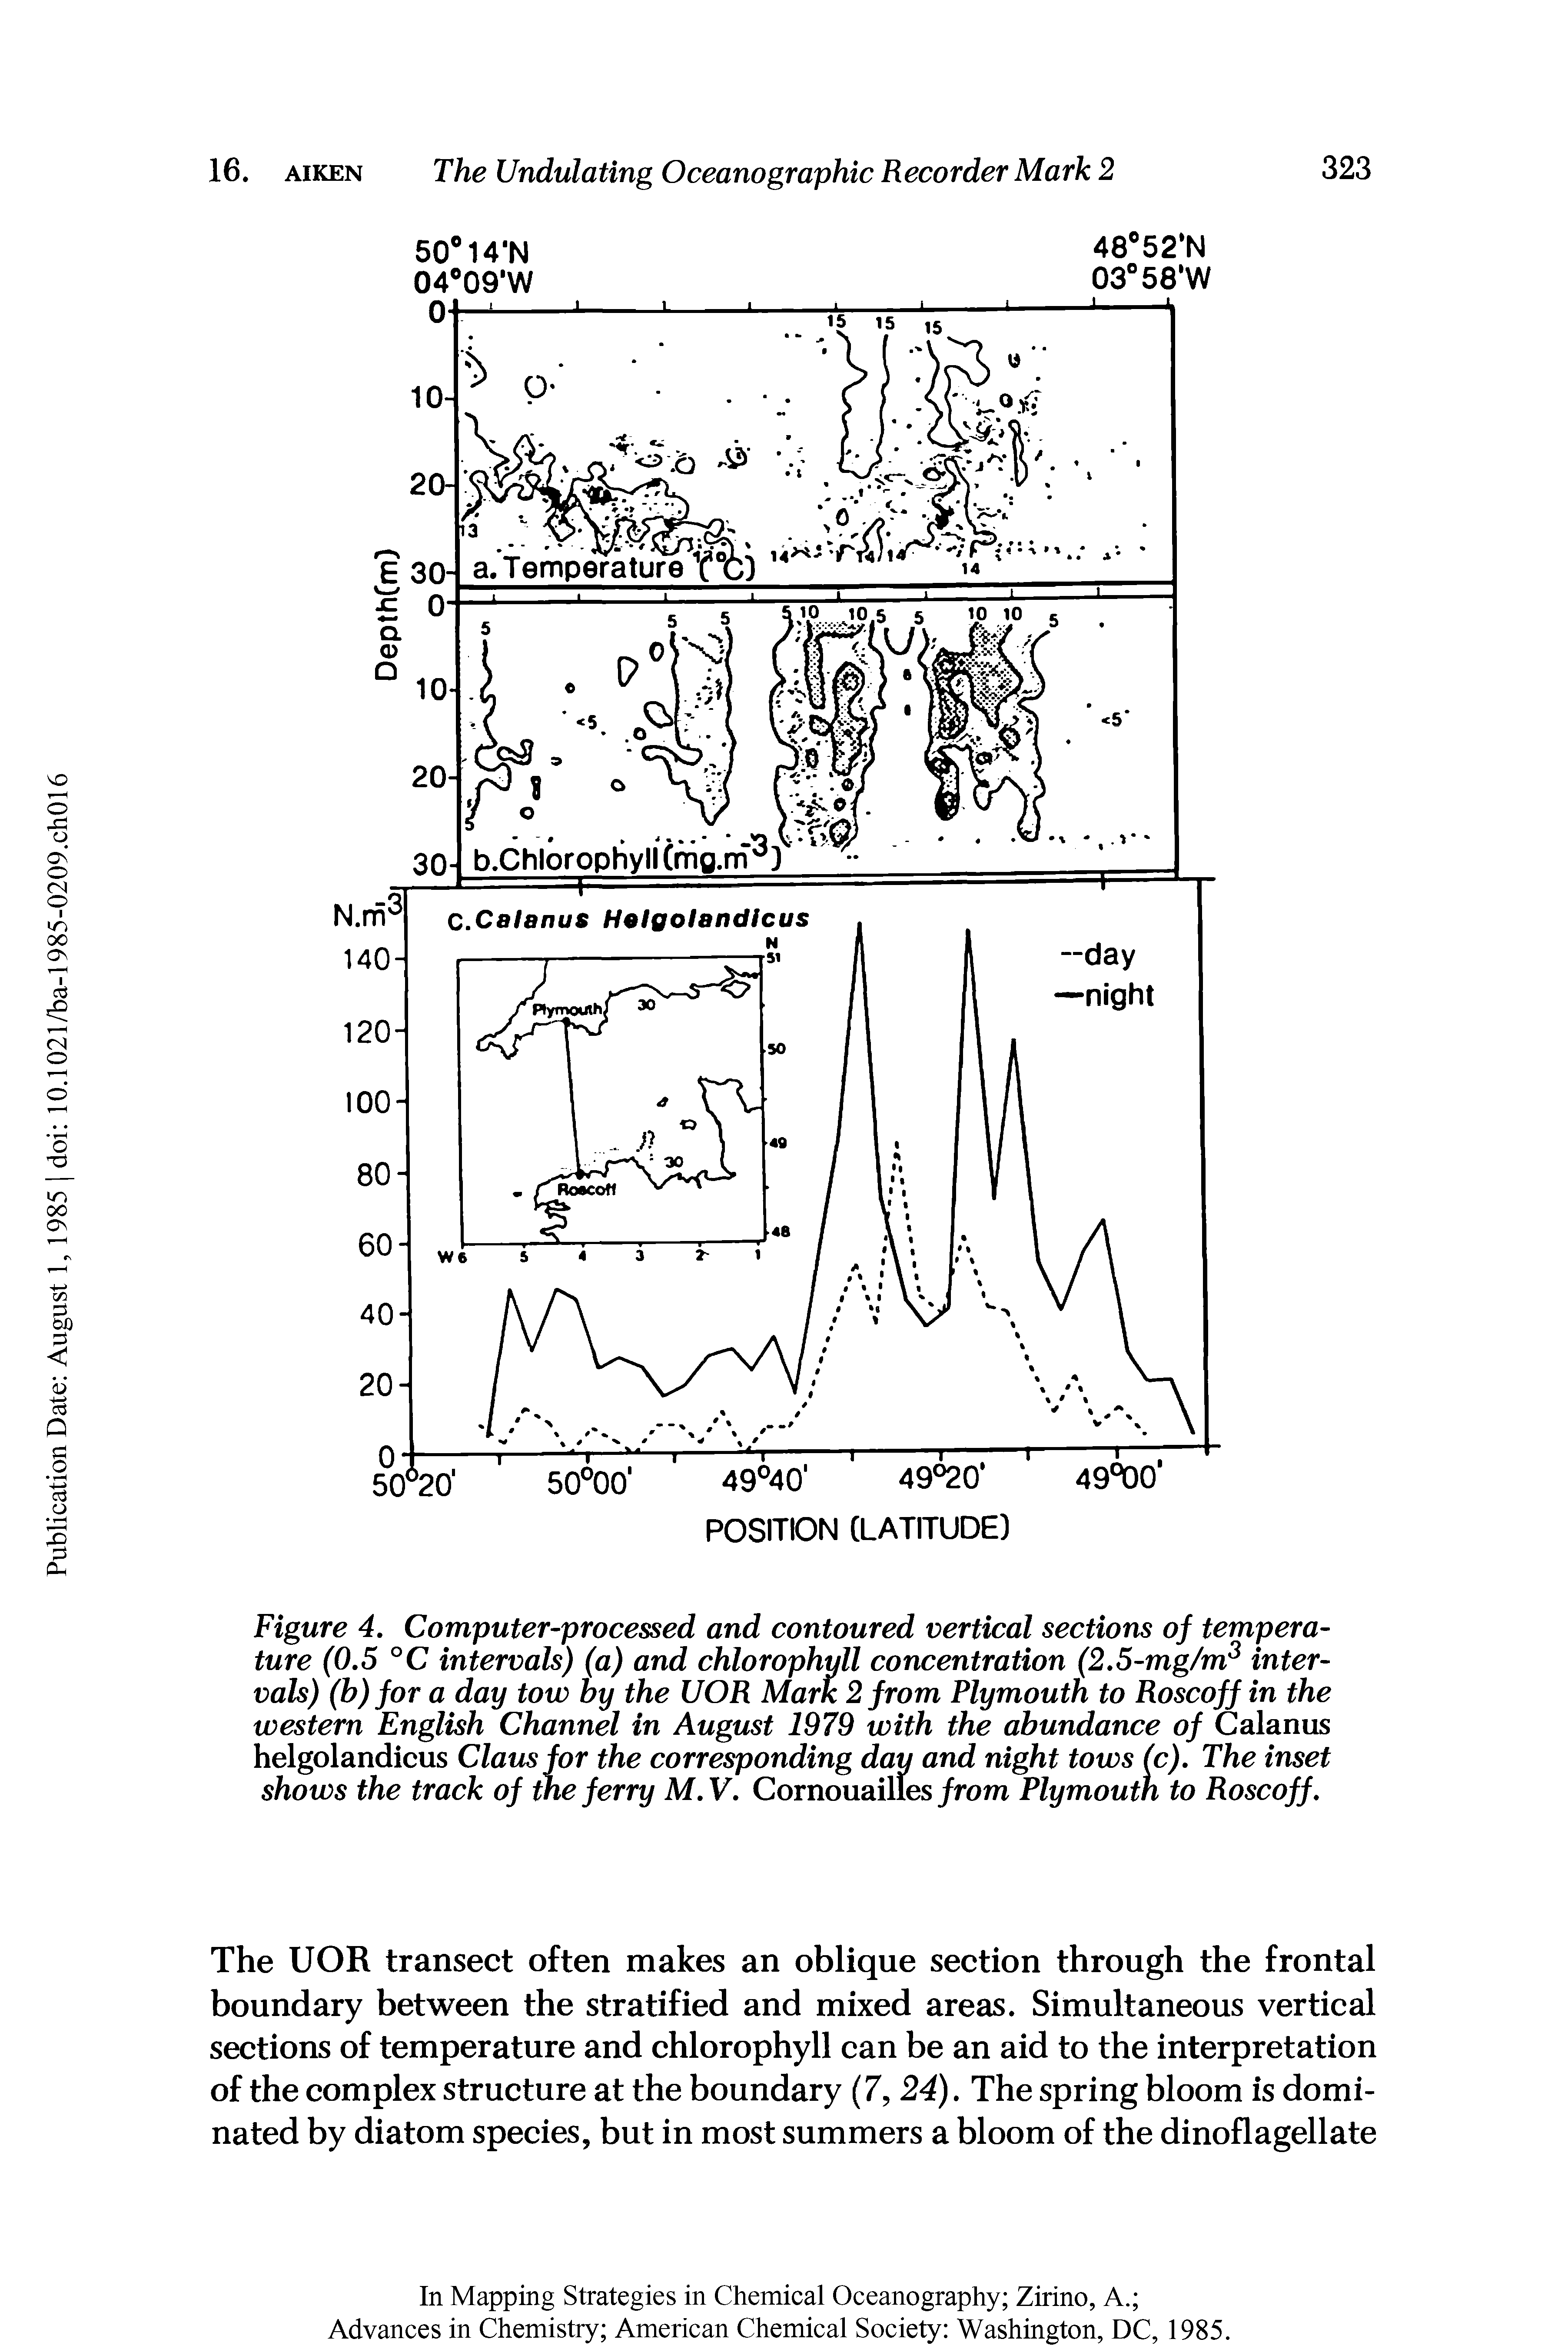 Figure 4, Computer-processed and contoured vertical sections of temperature (0.5 °C intervals) (a) and chlorophyll concentration (2.5-mg/m intervals) (b)for a day tow by the UOR Mark 2 from Plymouth to Roscoff in the western English Channel in August 1979 with the abundance of Calanus helgolandicus Claus for the corresponding day and night tows (c). The inset shows the track of the ferry M. V, Cornouailles from Plymouth to Roscoff,...